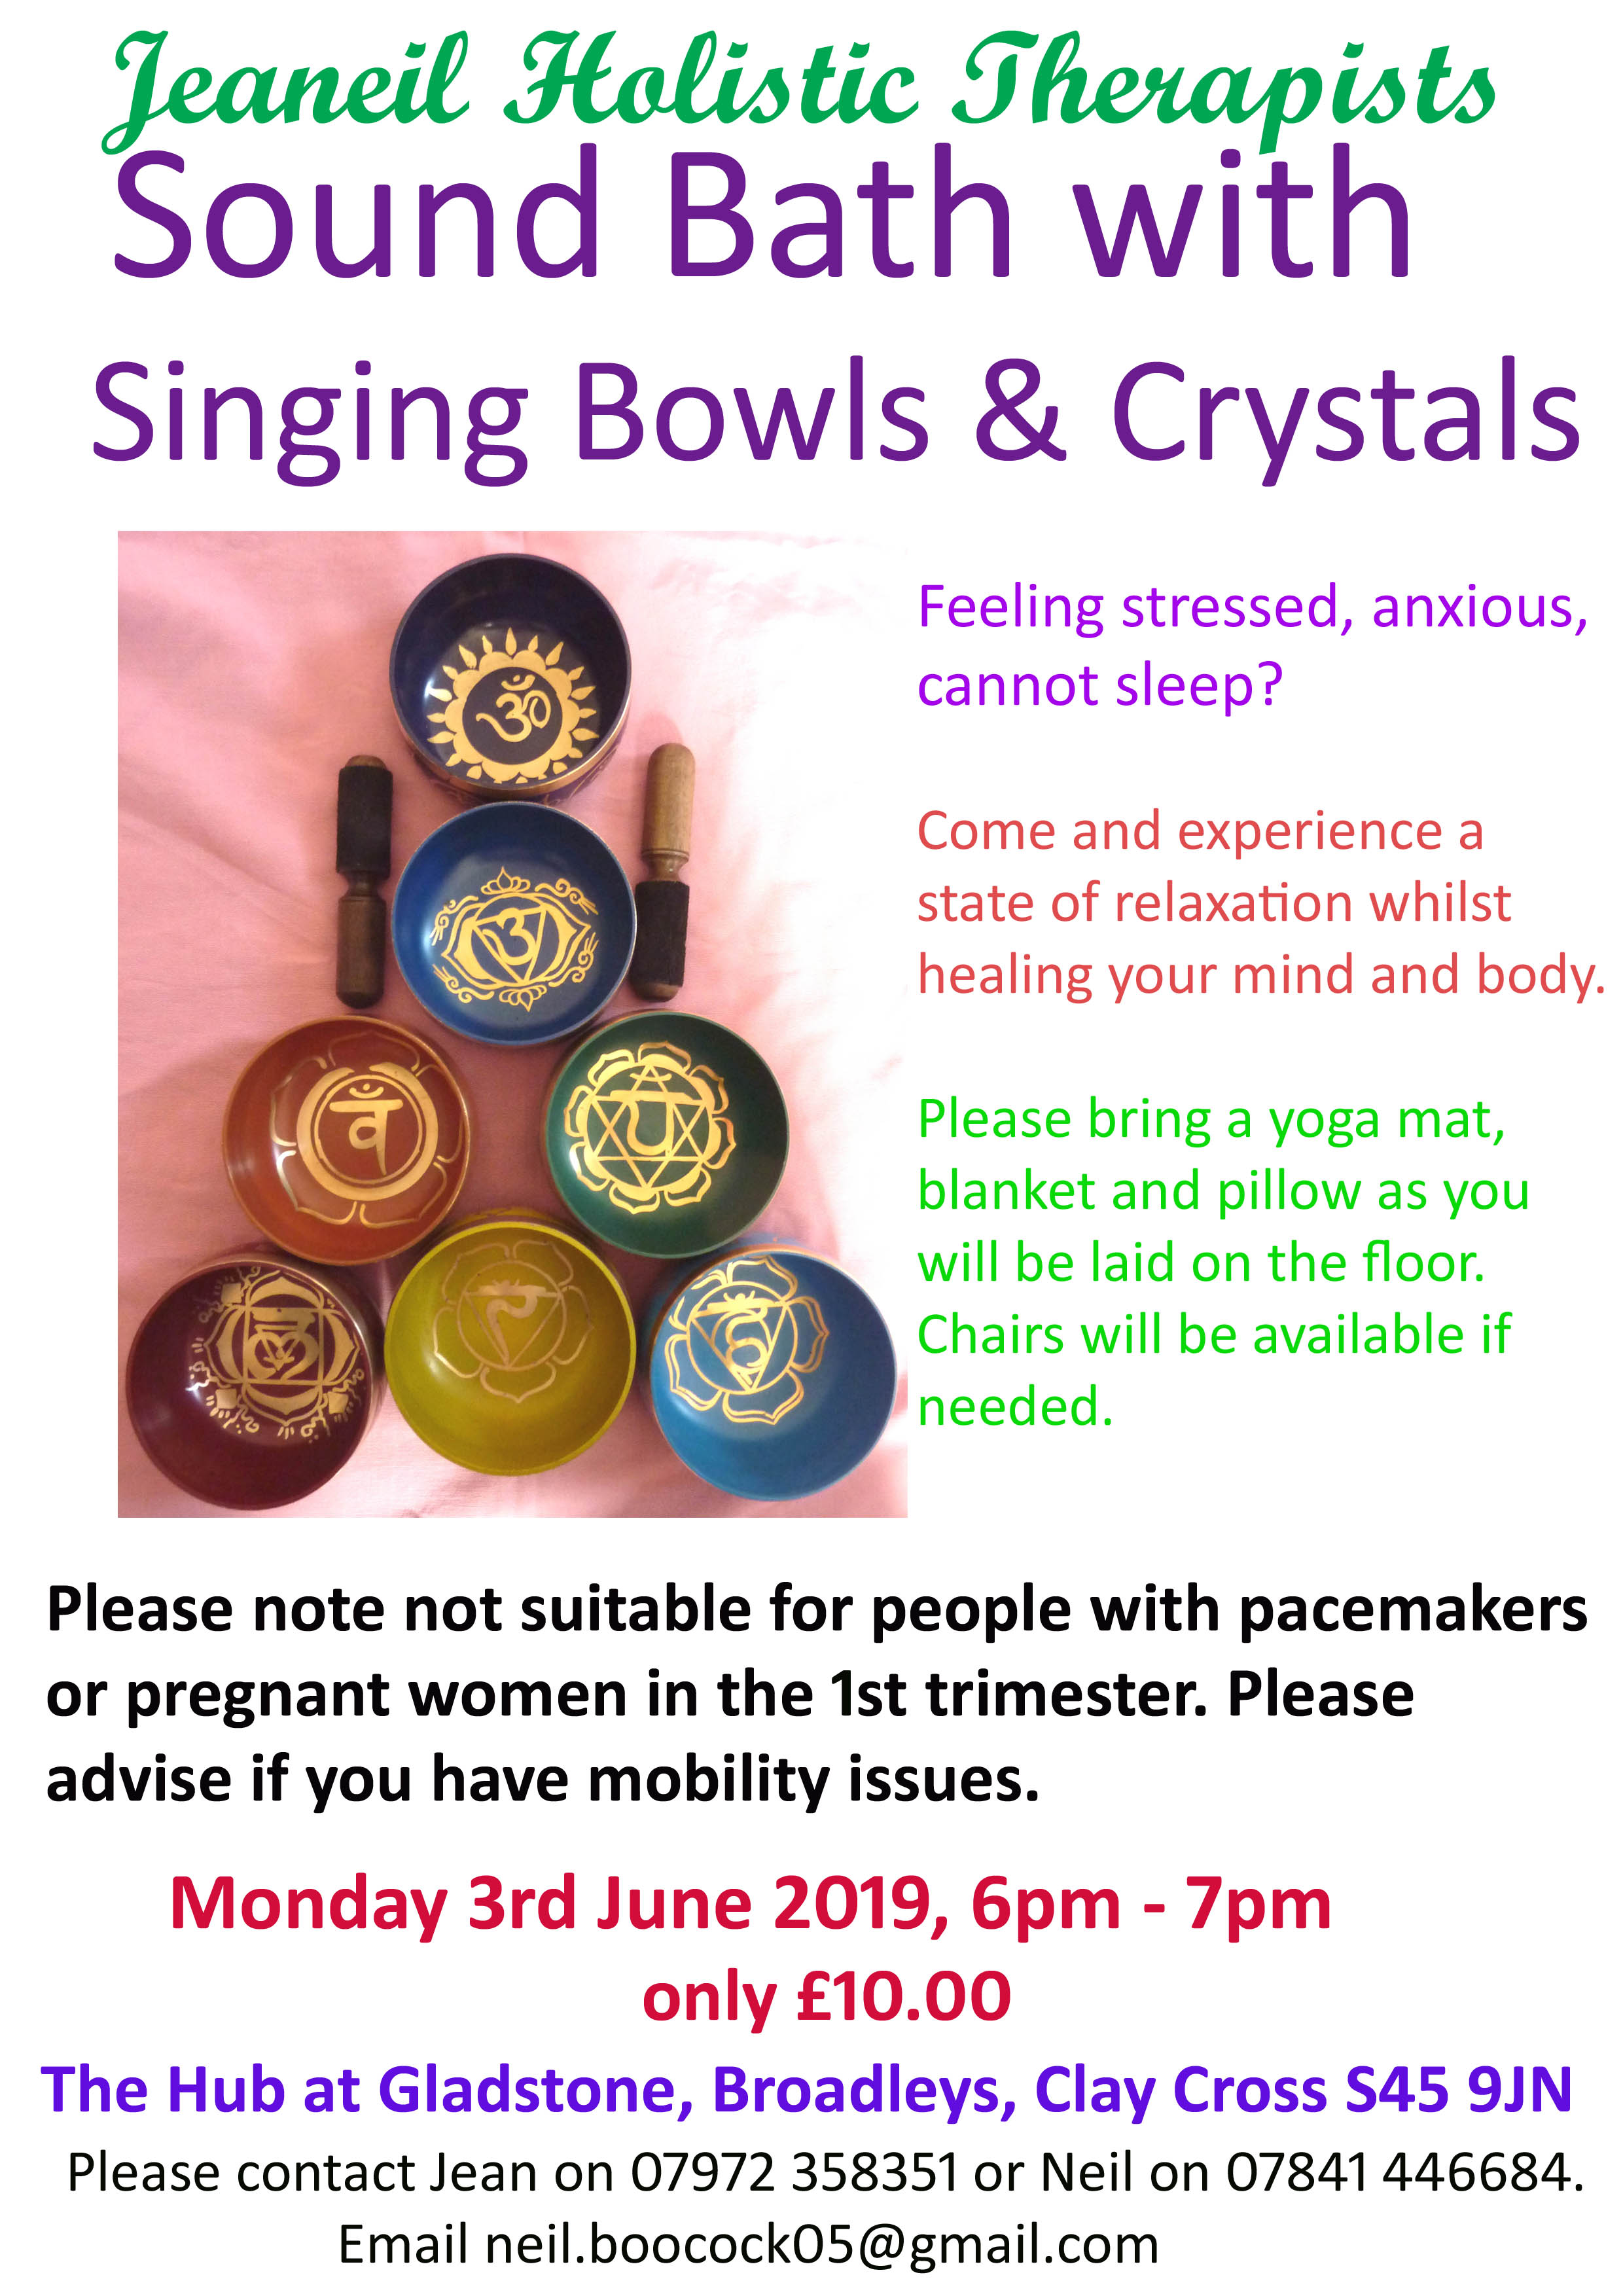 DERBYSHIRE - Sound Bath with Singing Bowls and Crystals